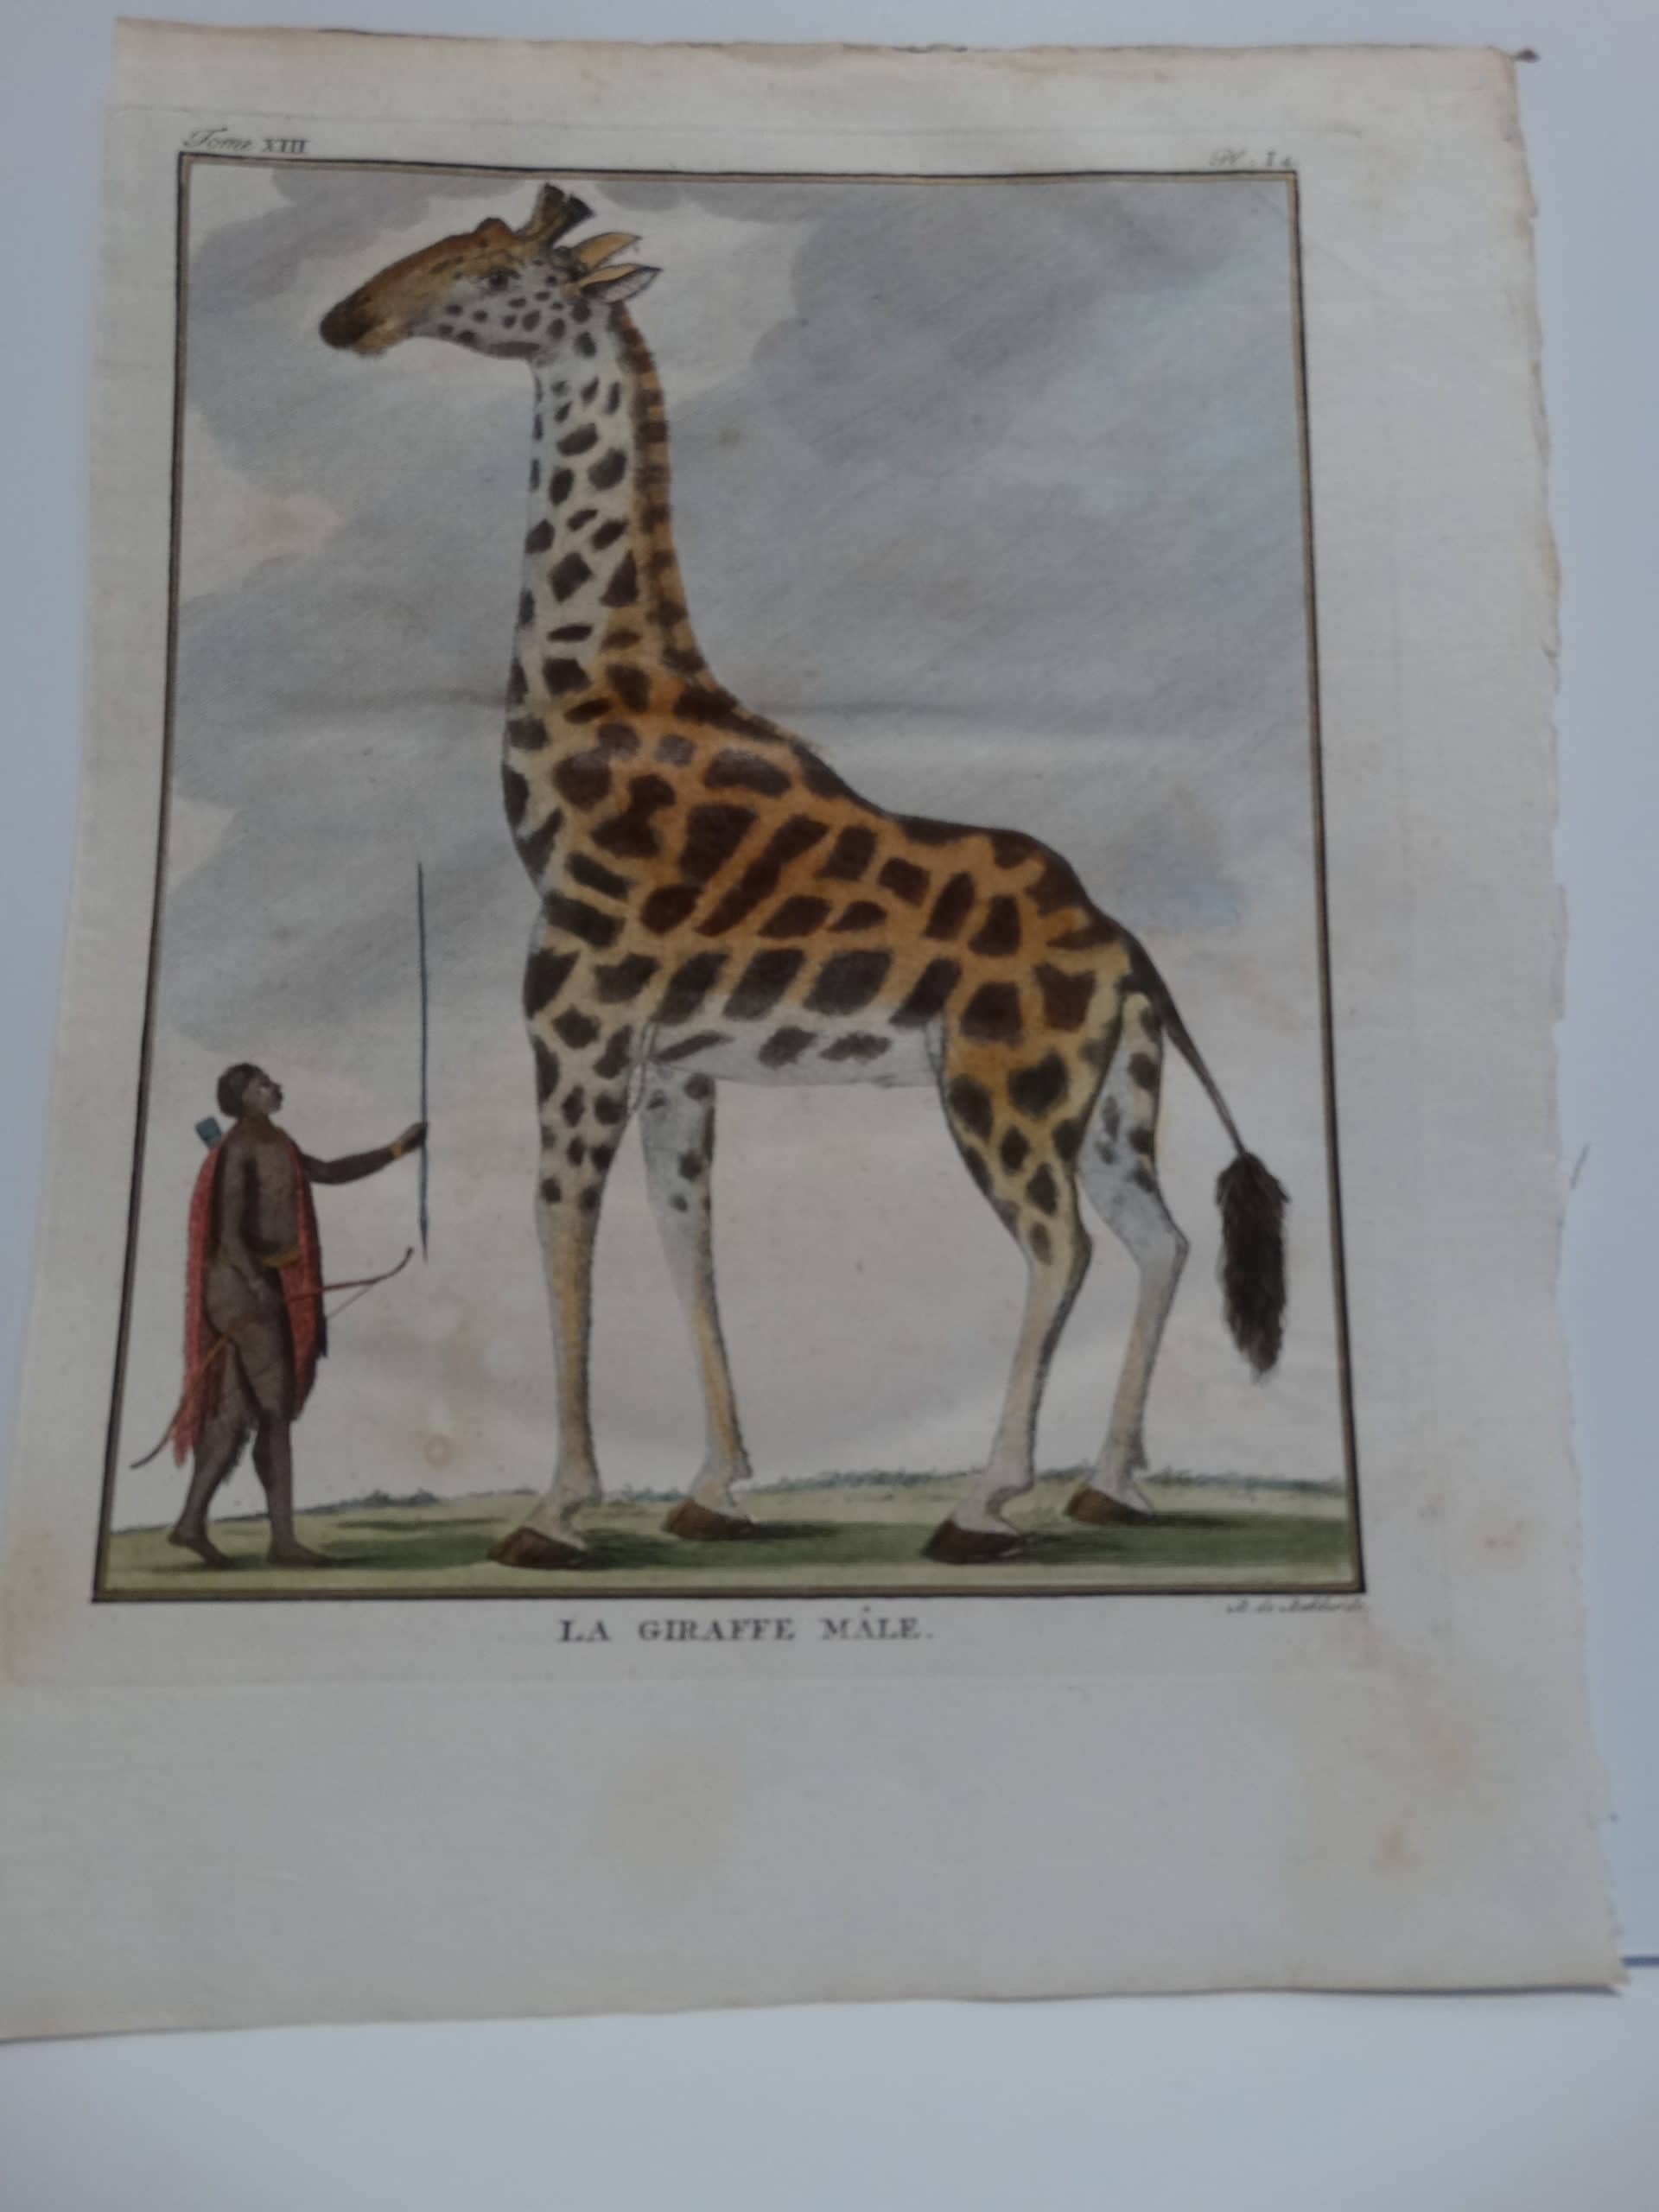 Exquisite 18th century engraving of a giraffe, next to African man.